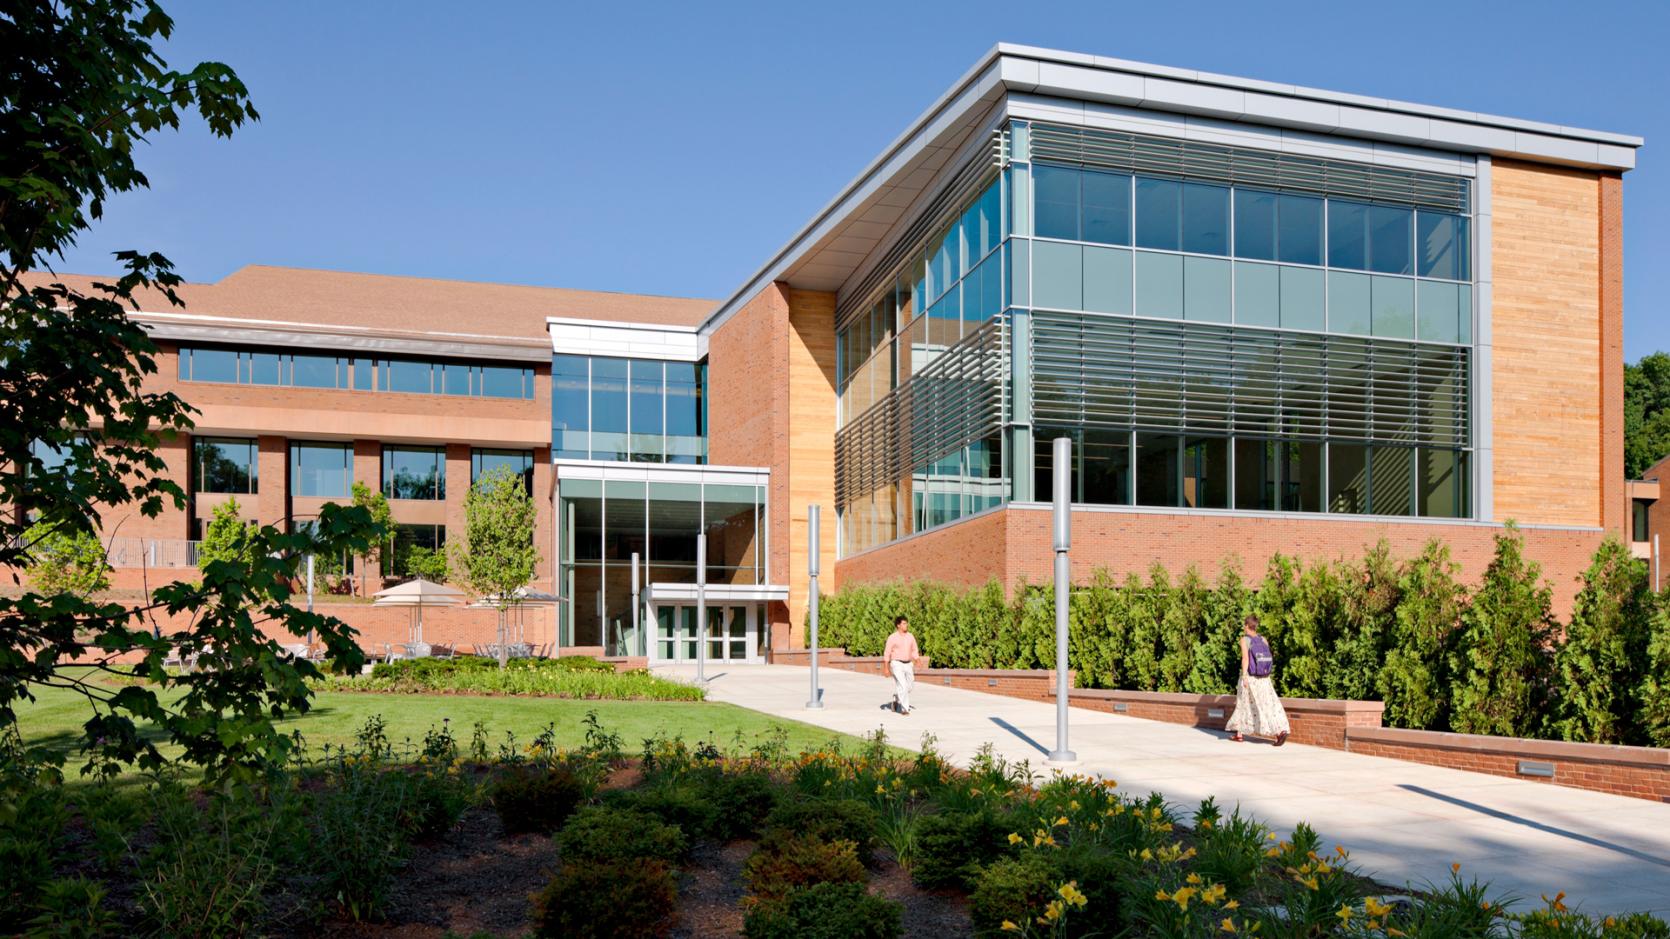 Exterior of Greenfield Community College building.